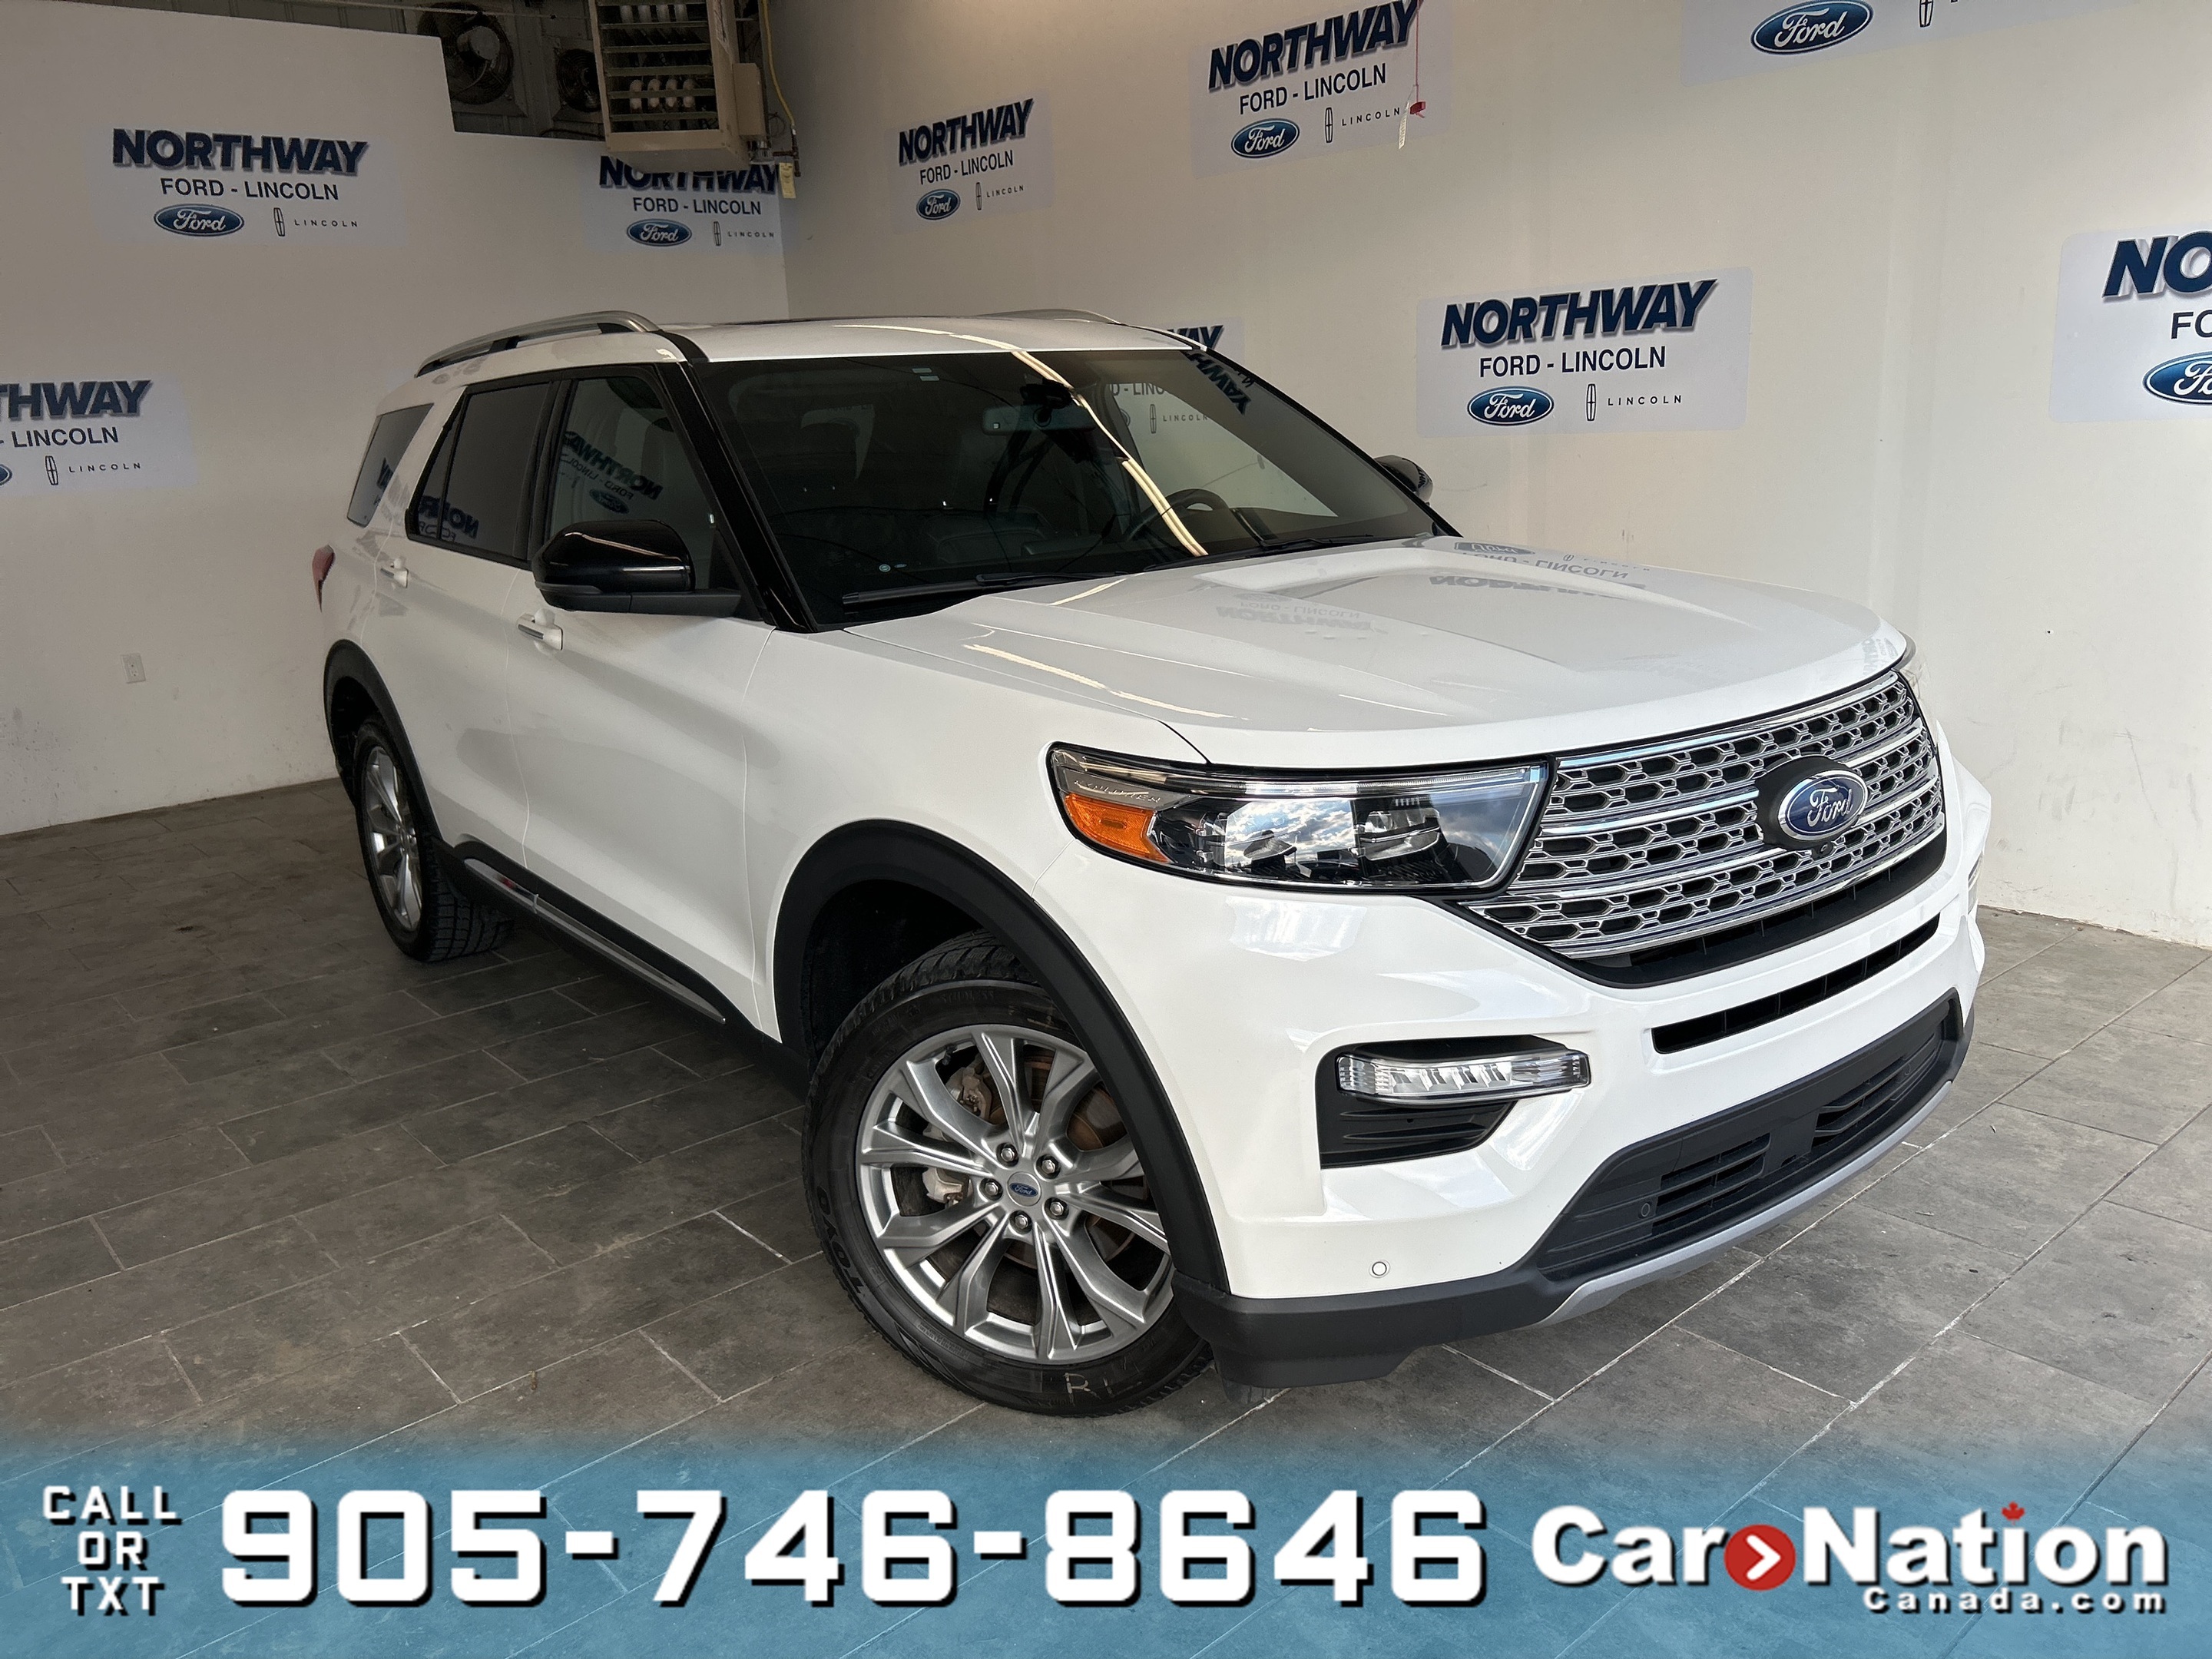 2020 Ford Explorer LIMITED | 4X4 | LEATHER | SUNROOF | NAV | 20" RIMS